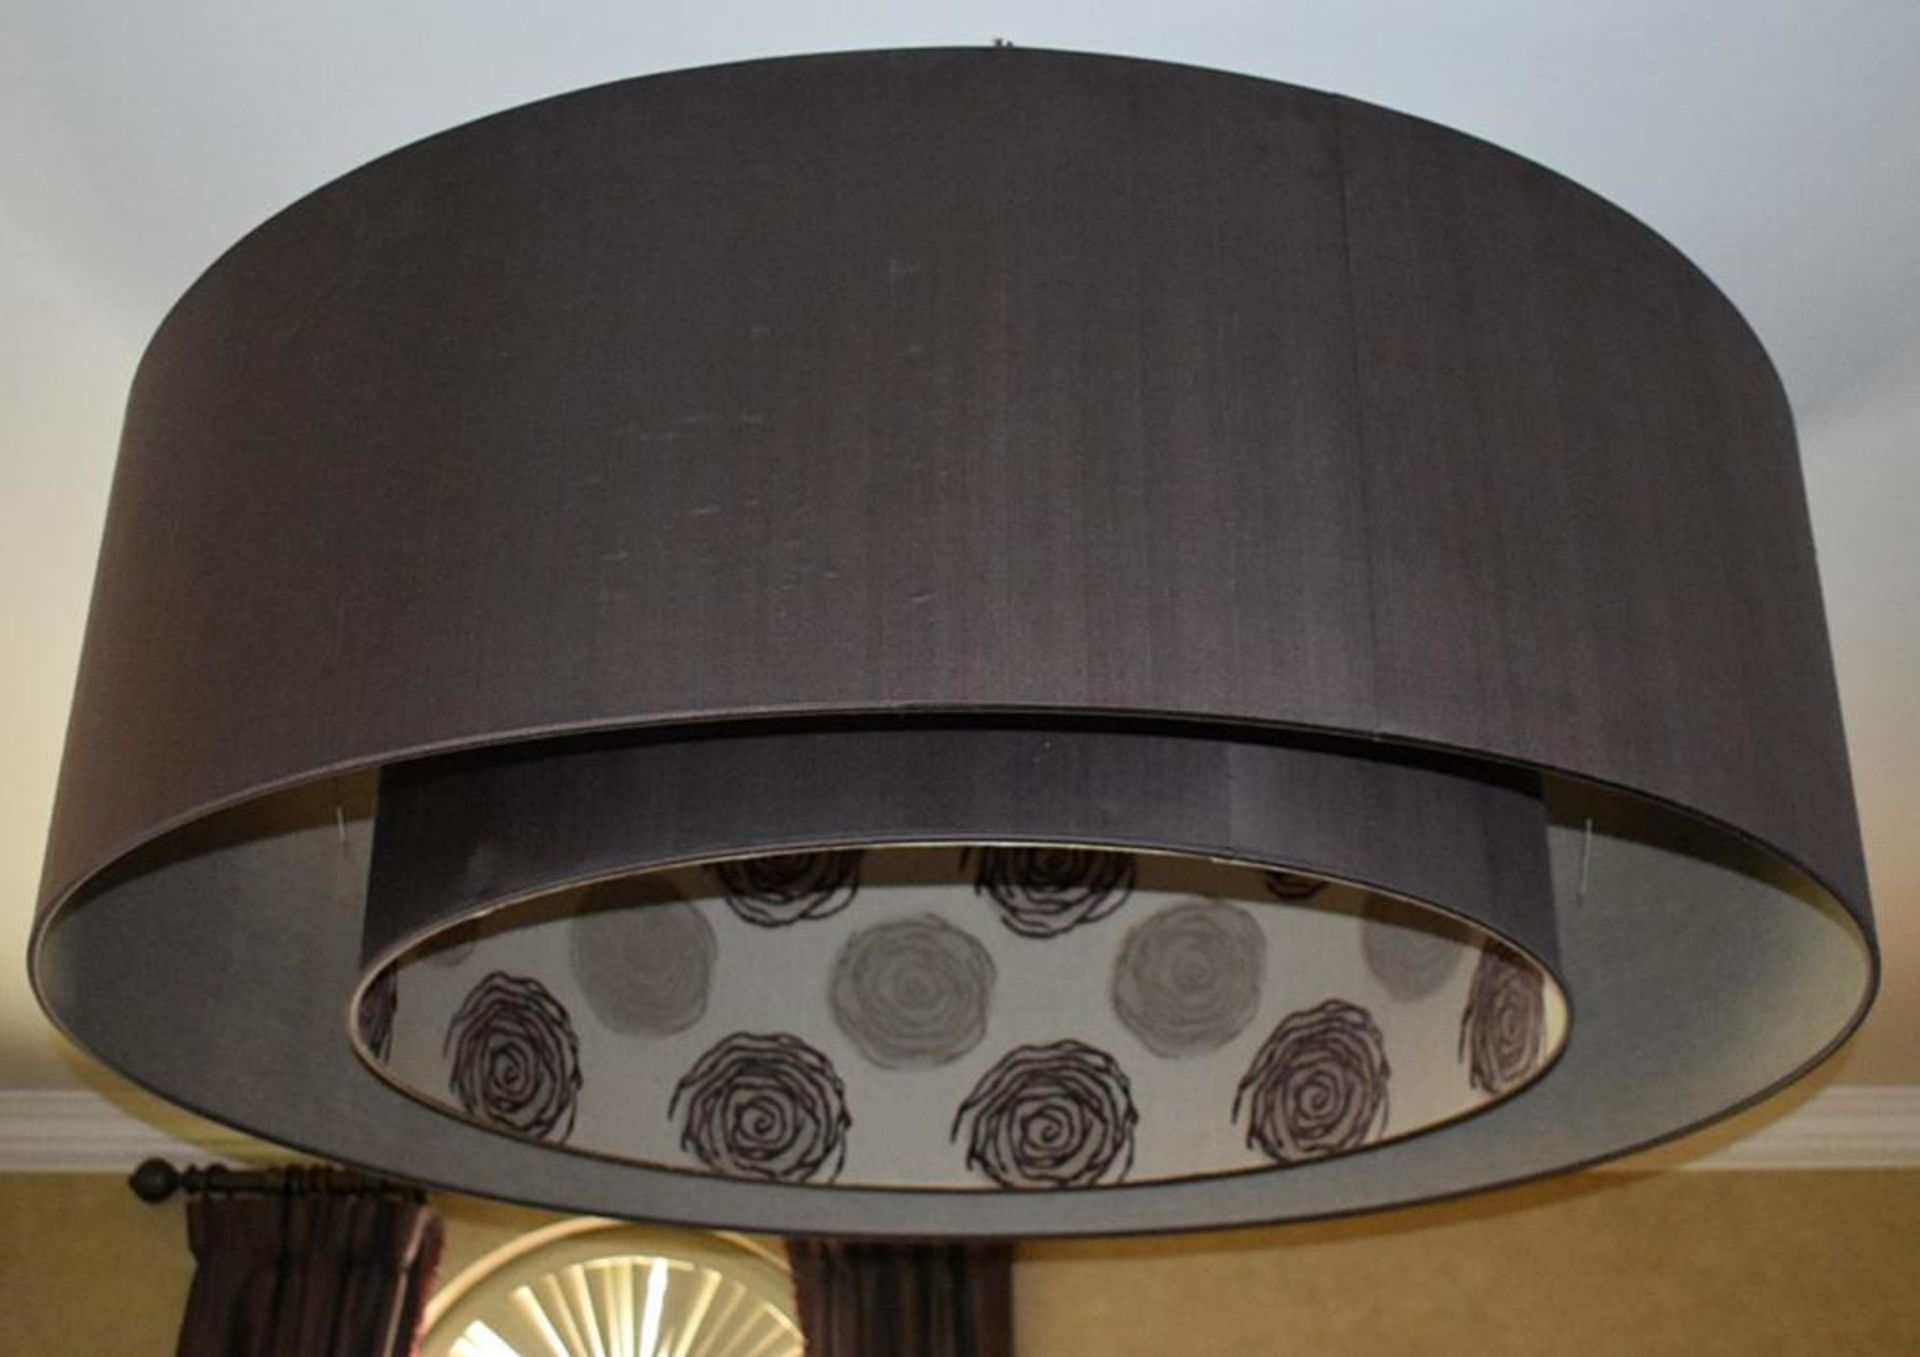 1 x Huge 1.5 Metre Light Fitting Featuring A Double Shade - Dimensions: 150cm Diamter, 50cm Height - Image 4 of 7